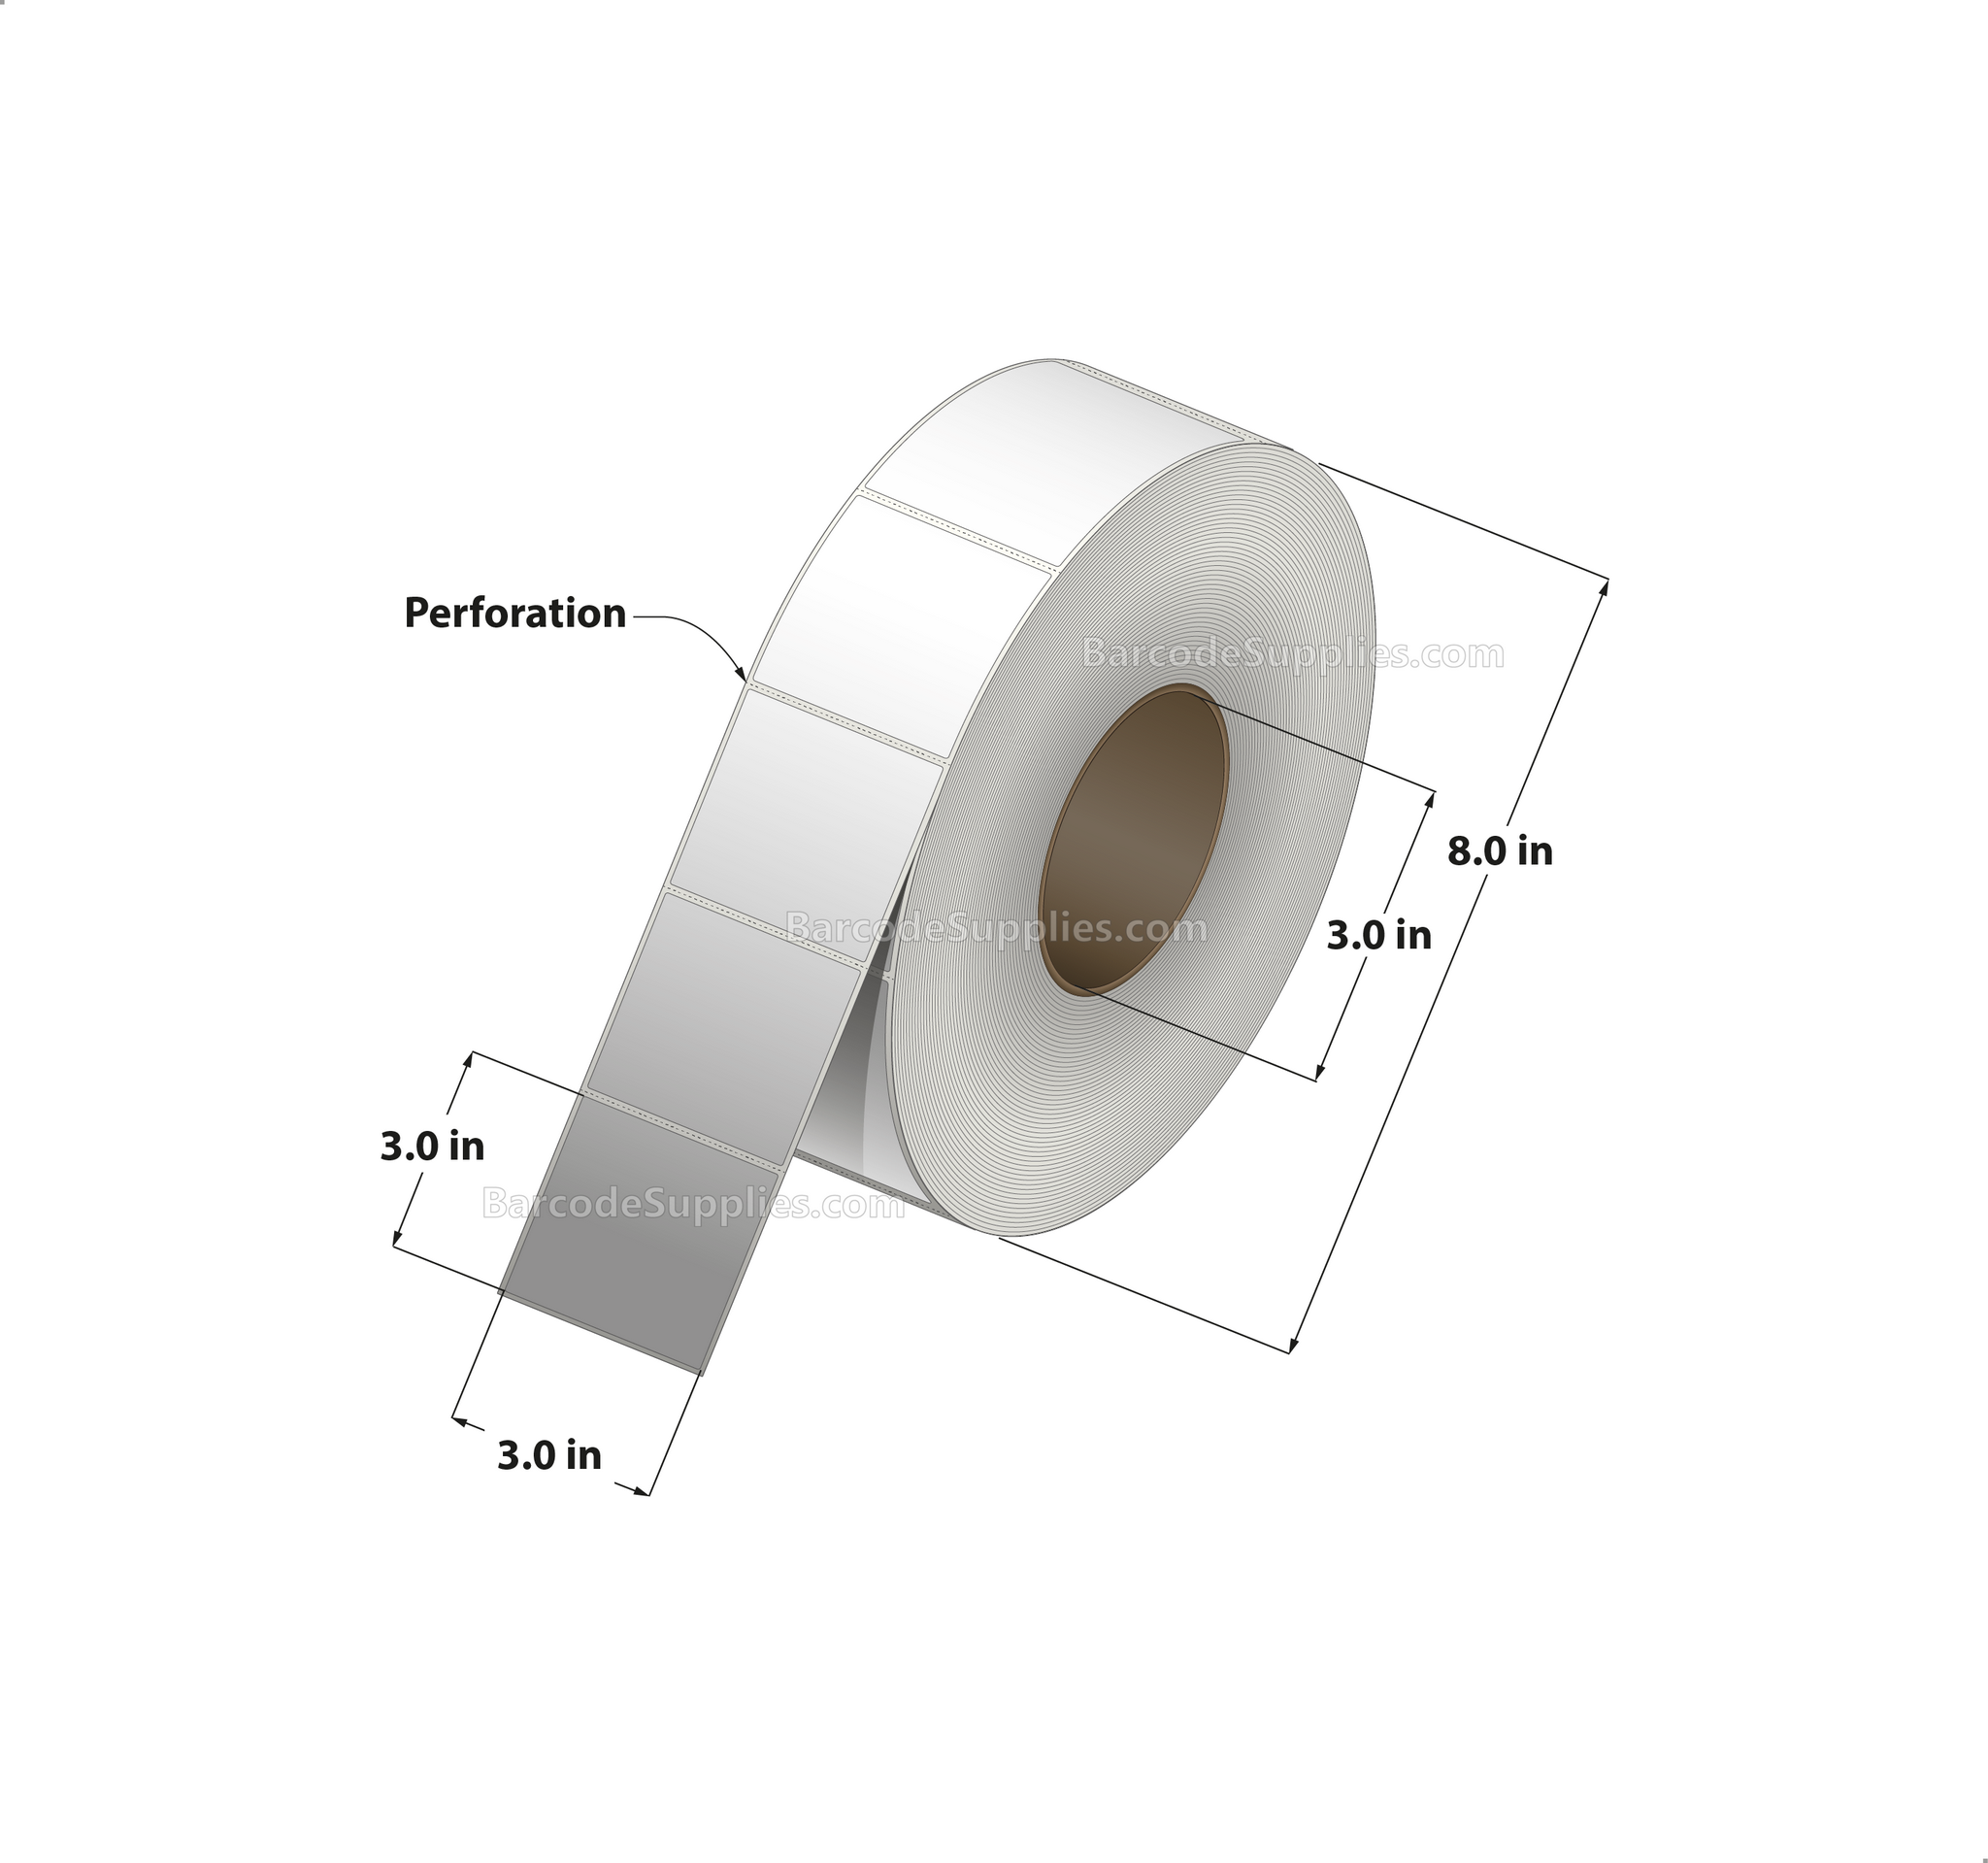 3 x 3 Thermal Transfer White Labels With Permanent Acrylic Adhesive - Perforated - 1900 Labels Per Roll - Carton Of 6 Rolls - 11400 Labels Total - MPN: TH33-1P